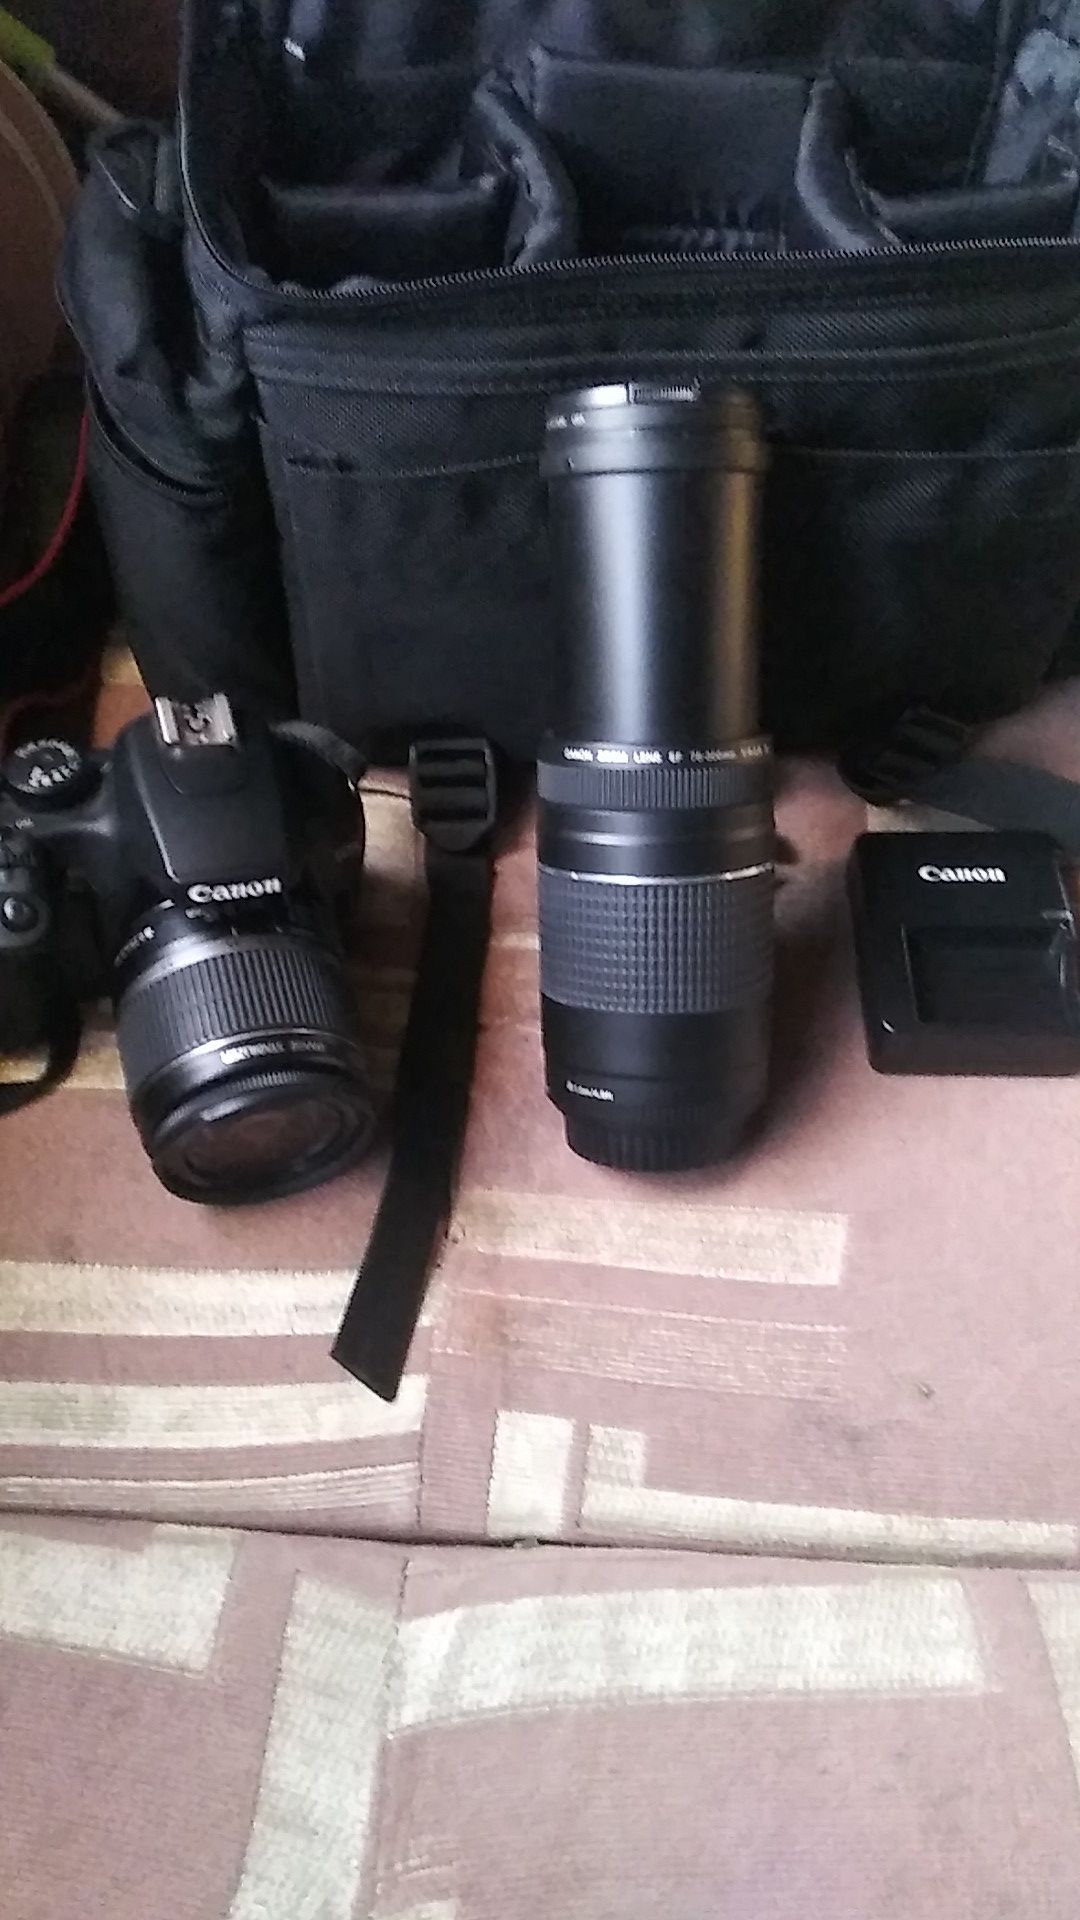 Canon rebel xs /w 75-300mm extra lense, charger,and memory stick